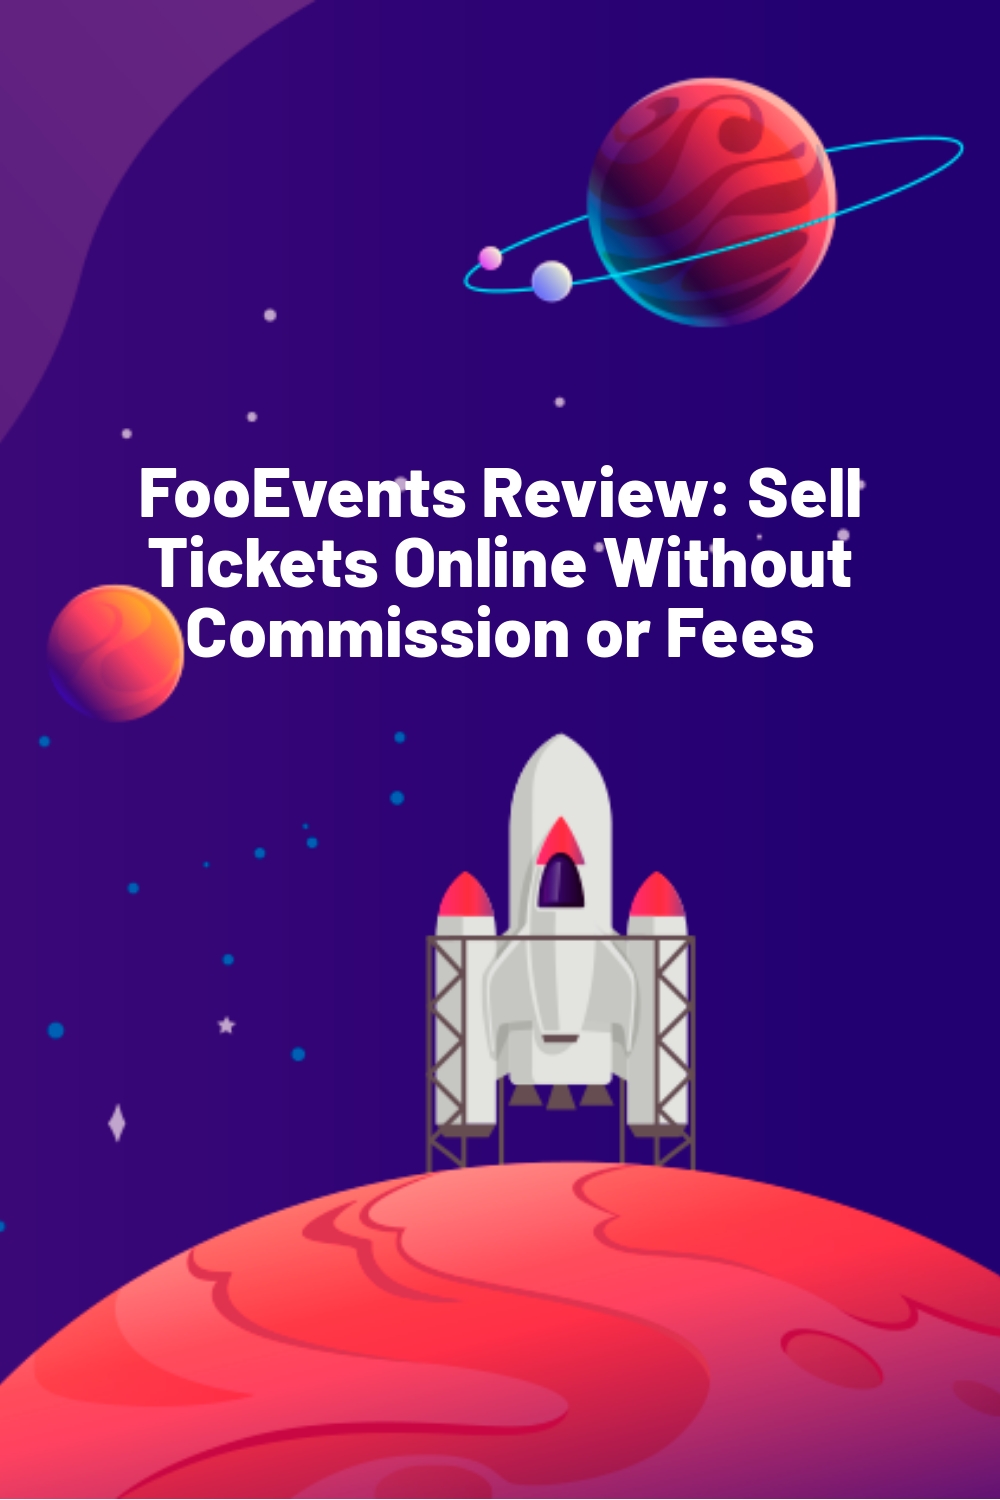 FooEvents Review: Sell Tickets Online Without Commission or Fees